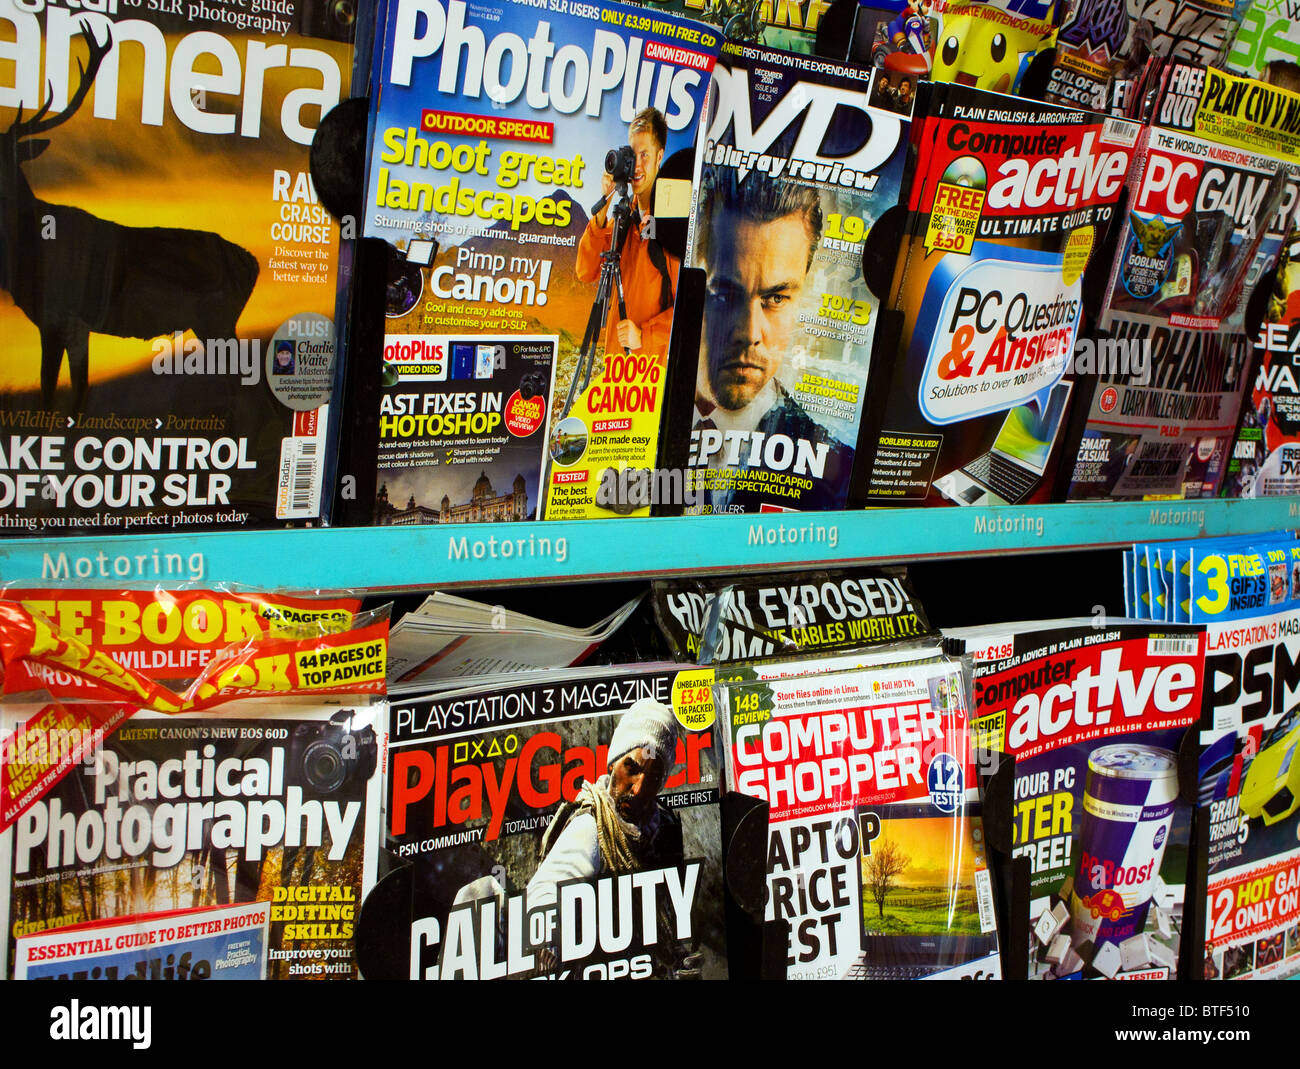 photography and computer magazines for sale in a newsagents shop Stock Photo